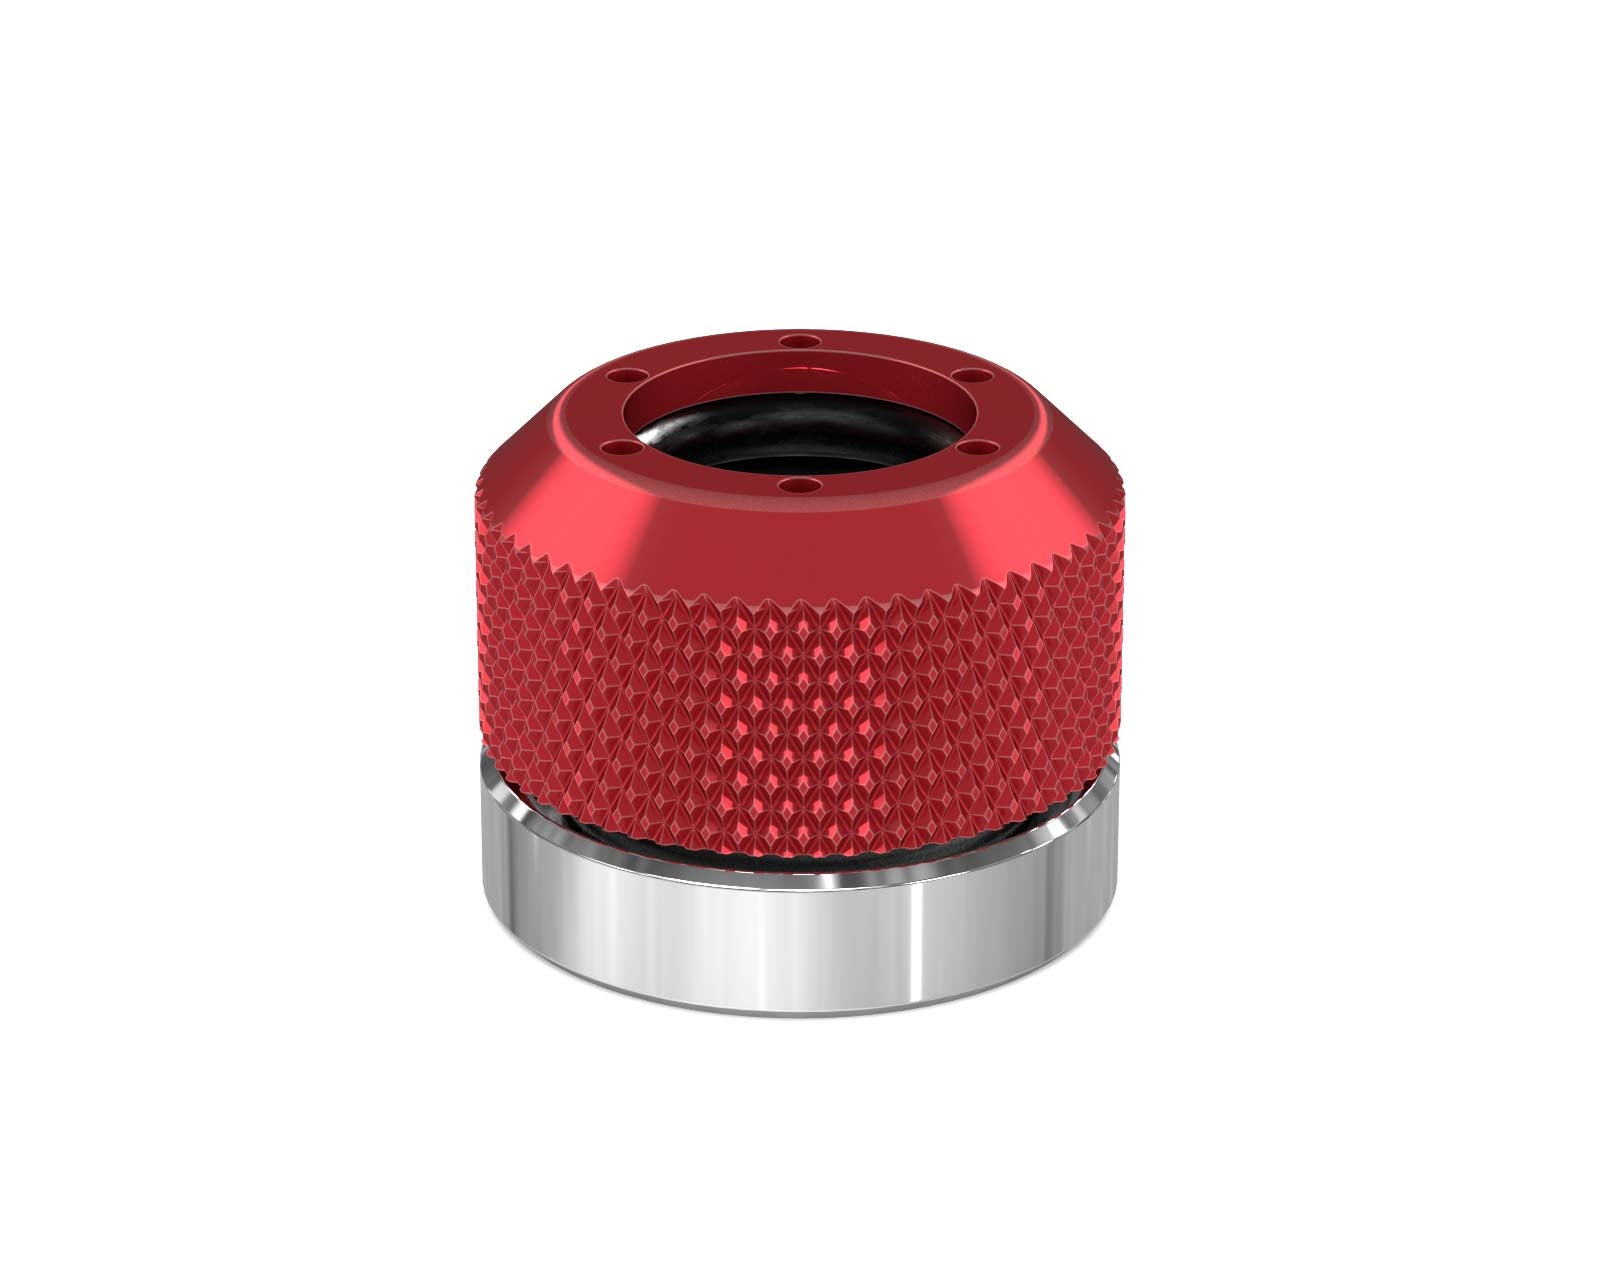 PrimoChill 1/2in. Rigid RevolverSX Series Coupler G 1/4 Fitting - PrimoChill - KEEPING IT COOL Candy Red